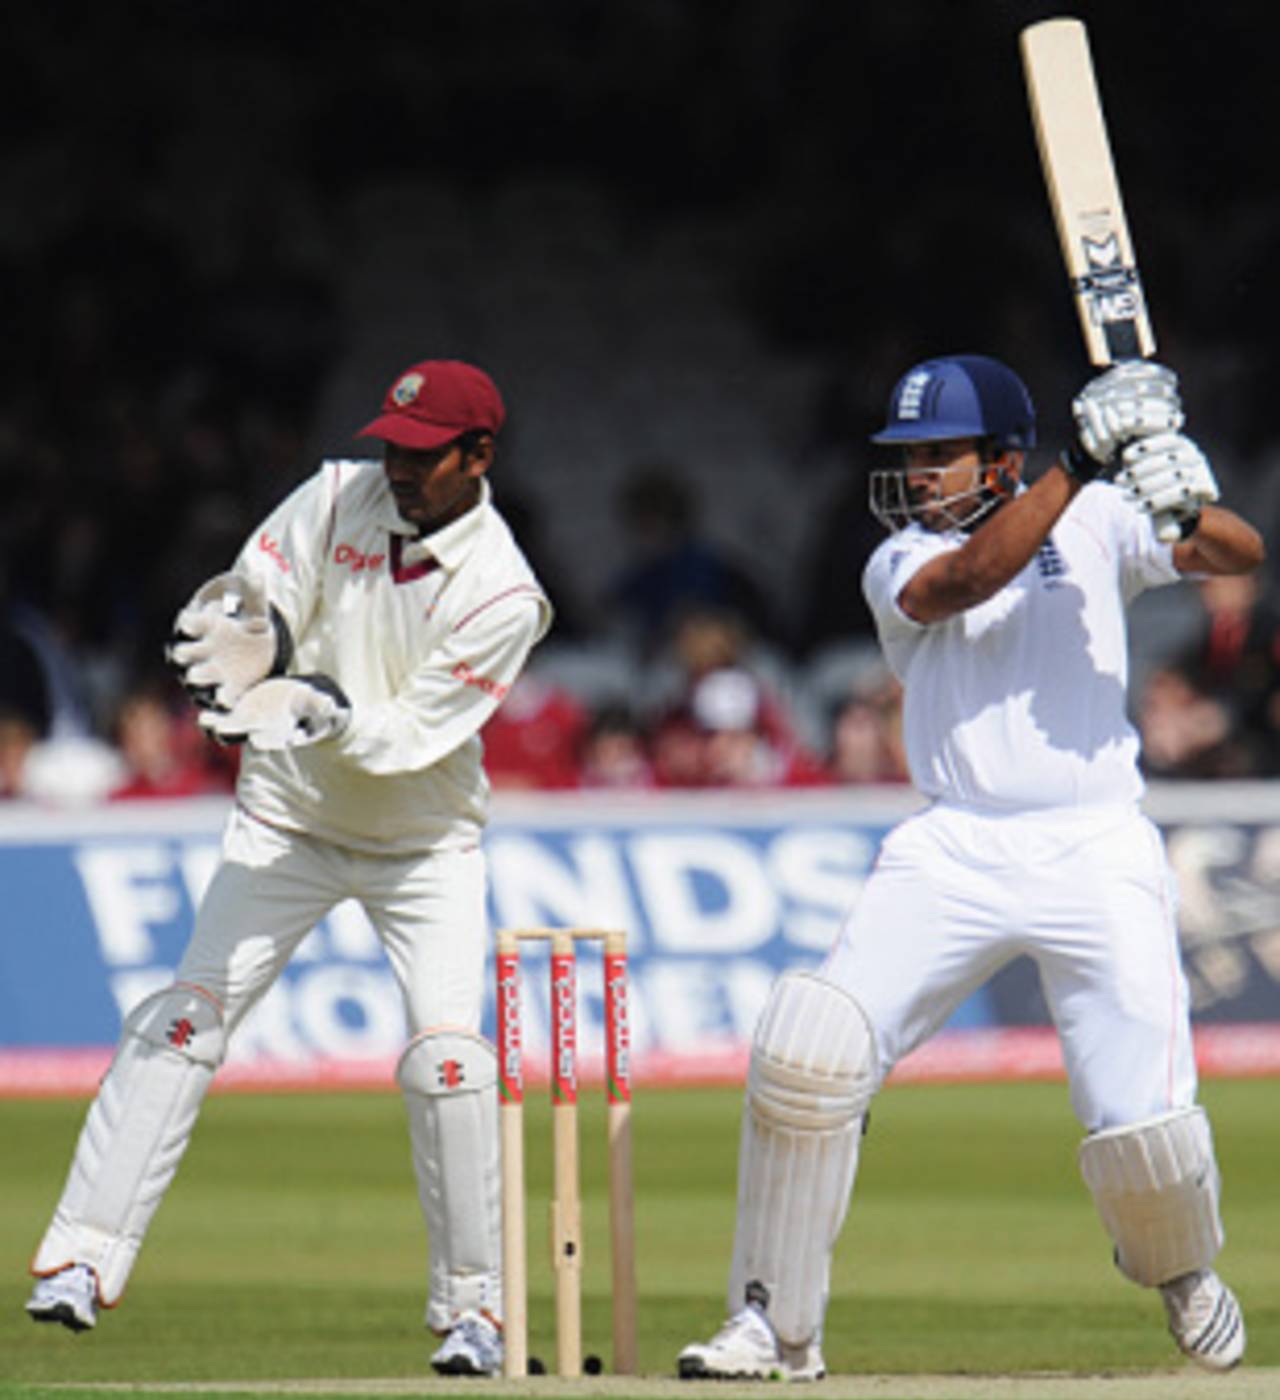 Ravi Bopara rocks back to drive square of the wicket, England v West Indies, 1st Test, Lord's, May 6, 2009